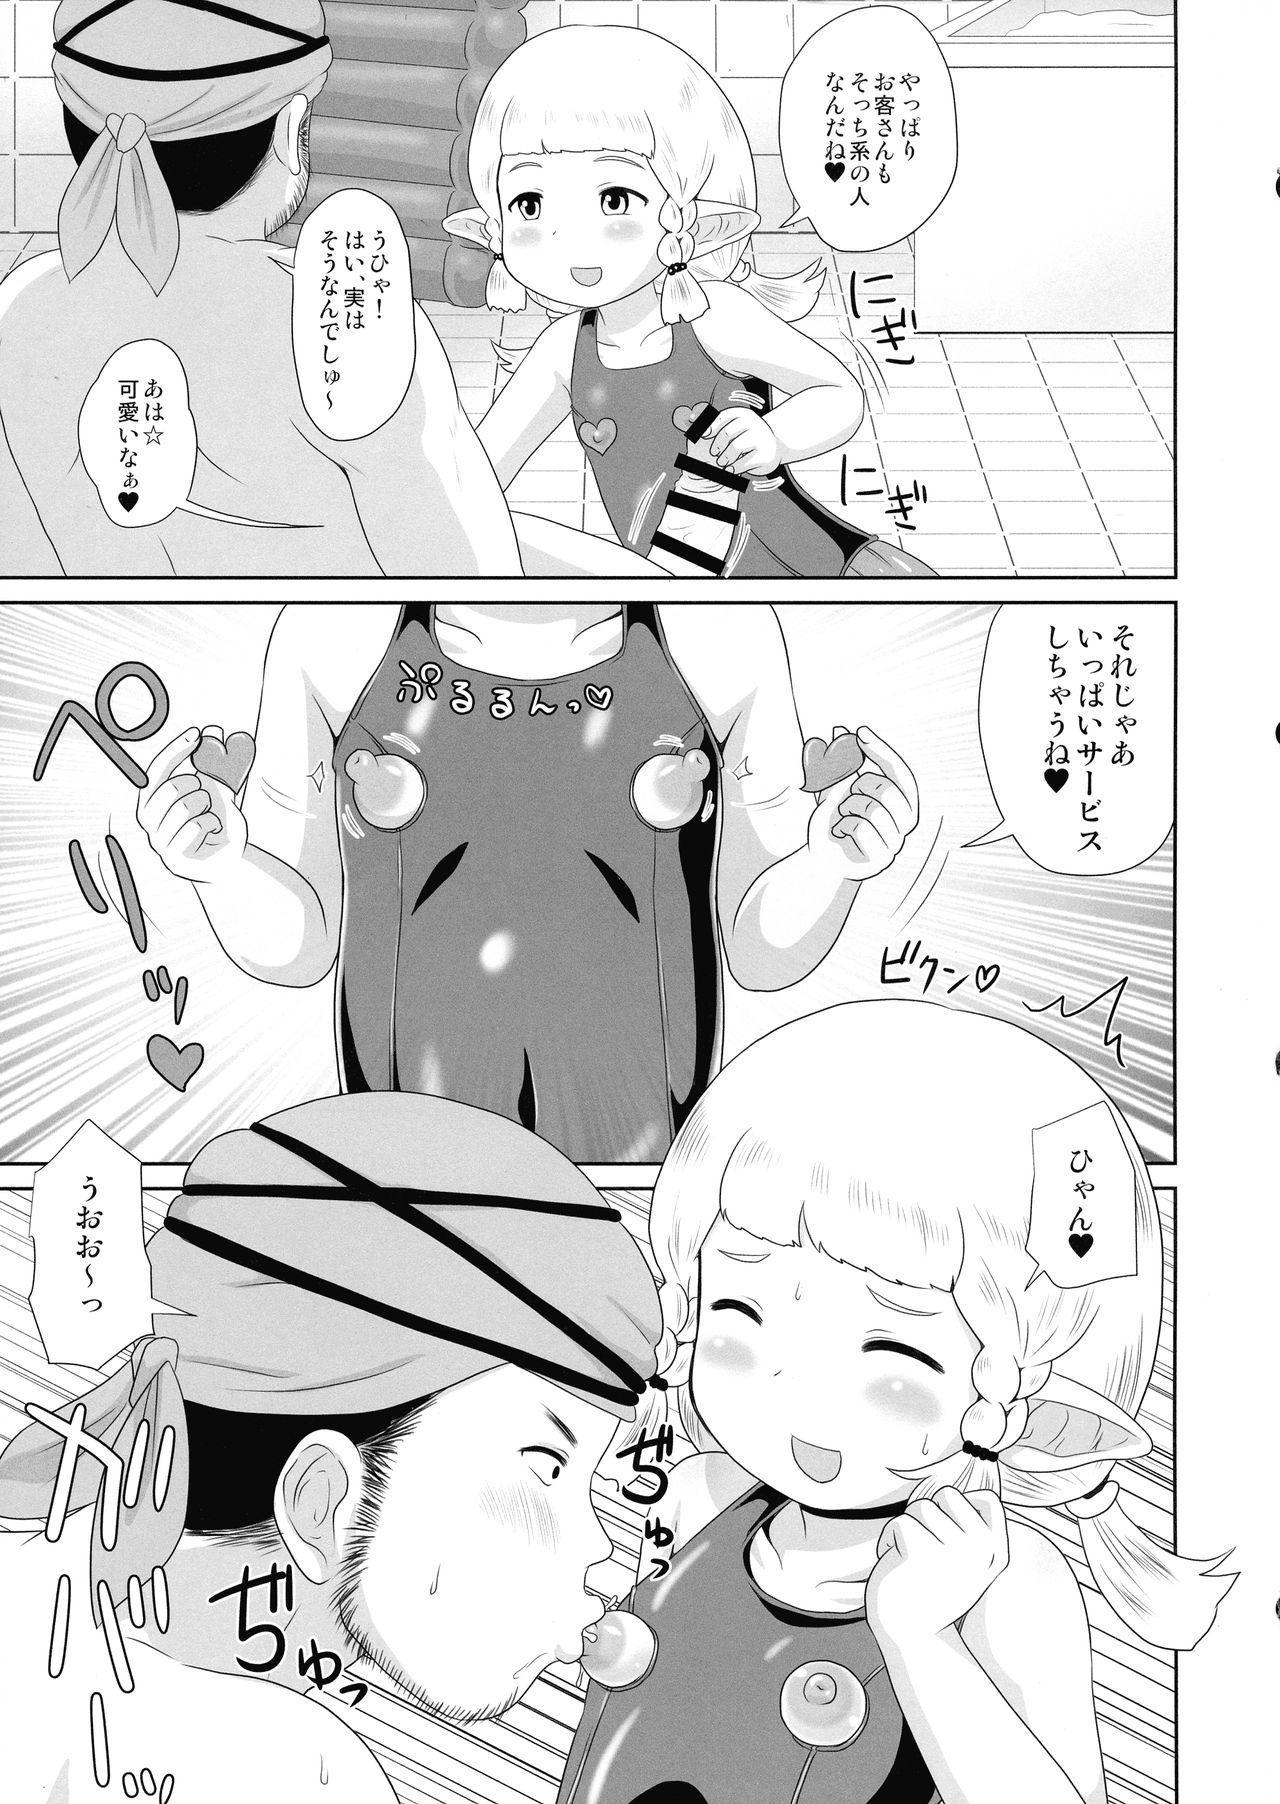 Whipping Grablu Harvin Soap - Granblue fantasy Mum - Page 5